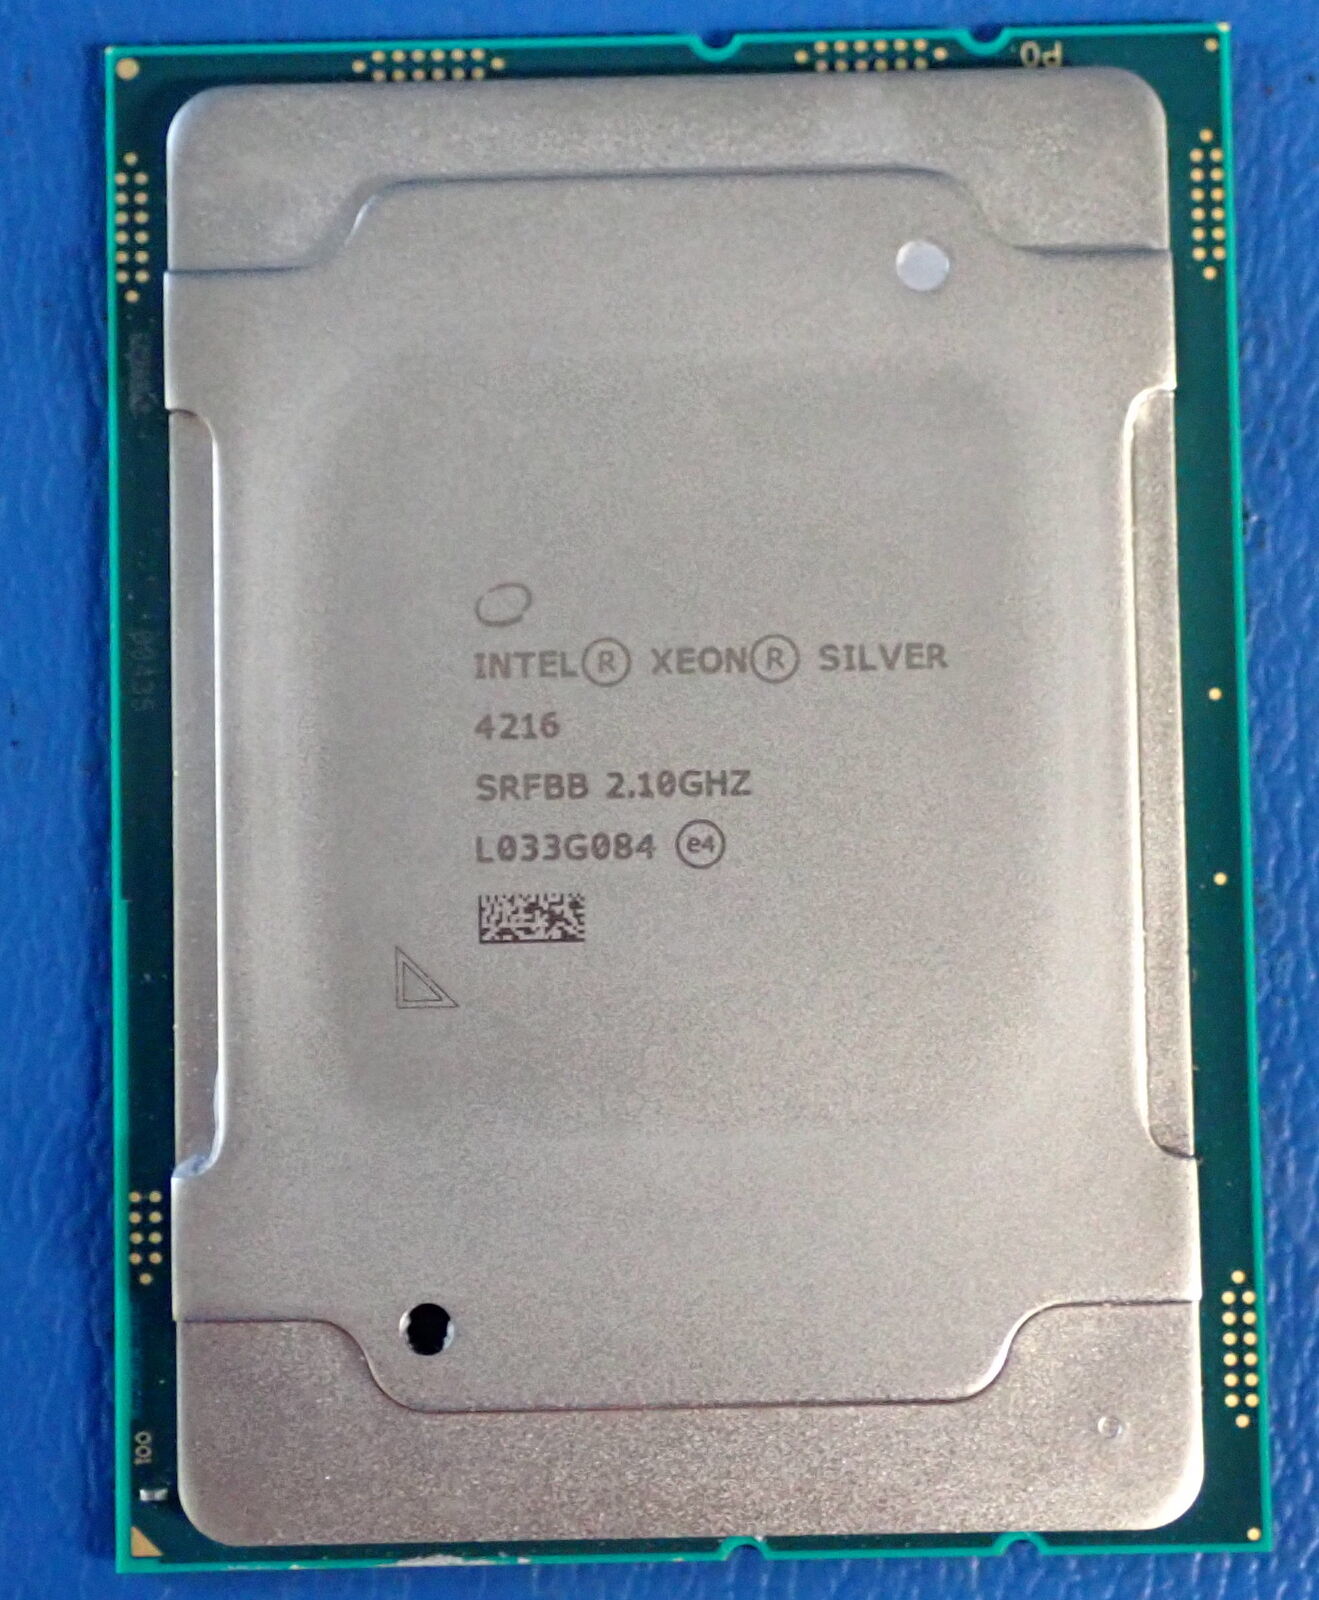 Intel Xeon Gold 4216 Scalable Processor SRFBB 16-Cores 2.1/3.2GHZ Turbo